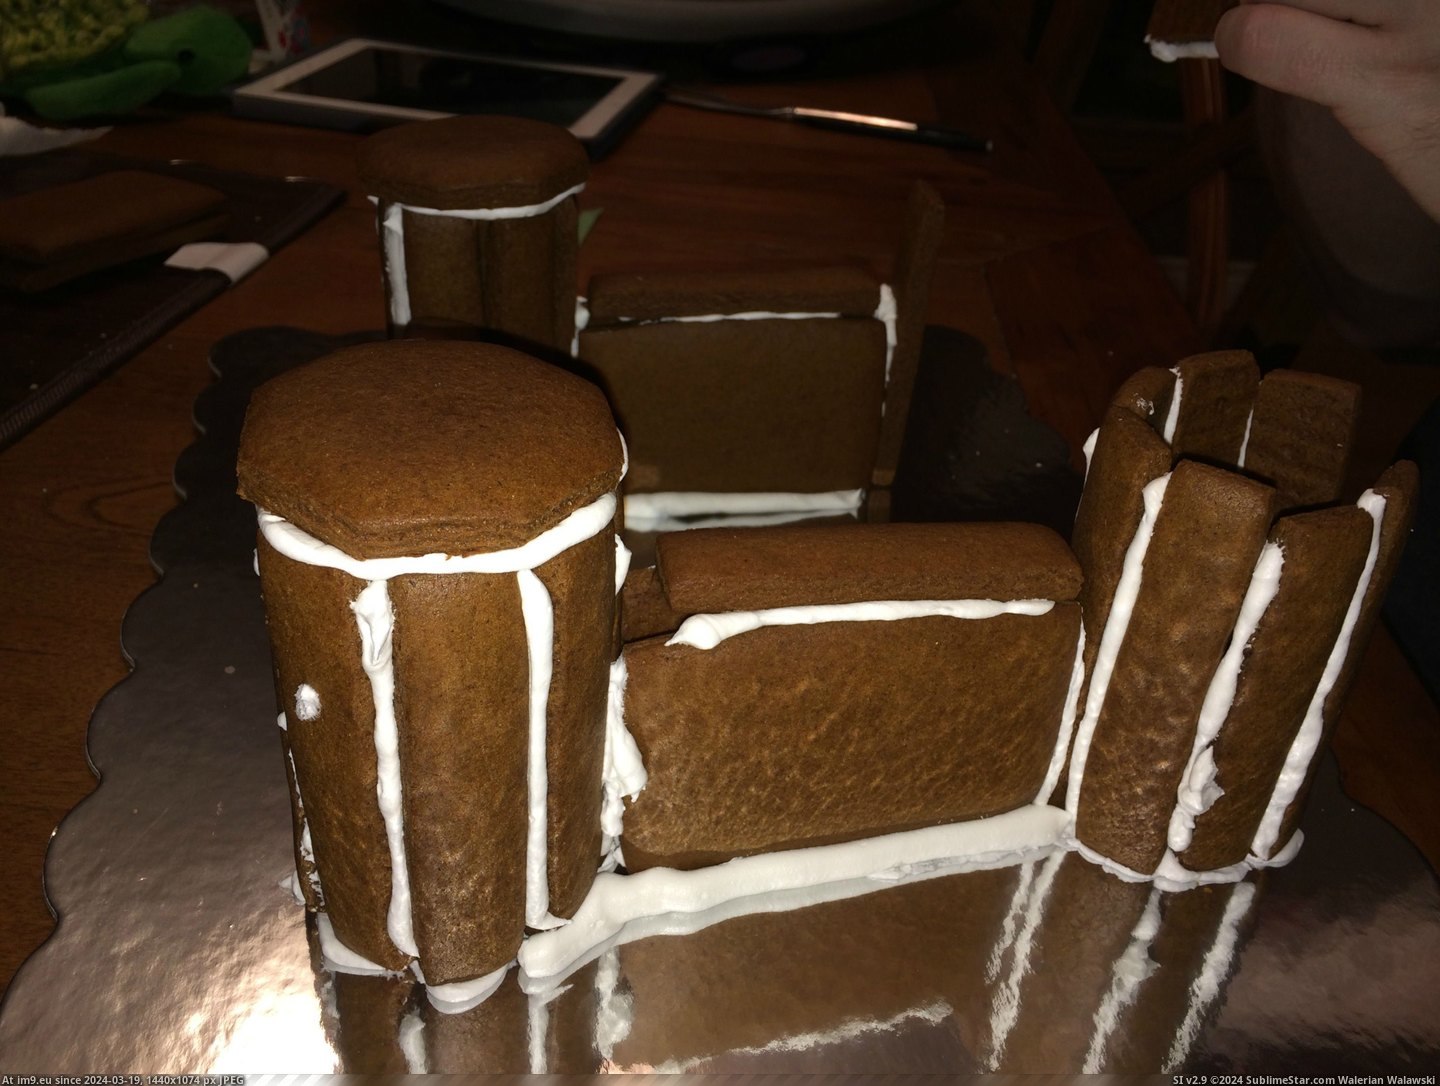 #Husband #Get #Our #Divorced #Collaborated #Project #Gingerbread #Success [Pics] My husband and I collaborated on our first gingerbread project and didn't get divorced...success! 17 Pic. (Obraz z album My r/PICS favs))